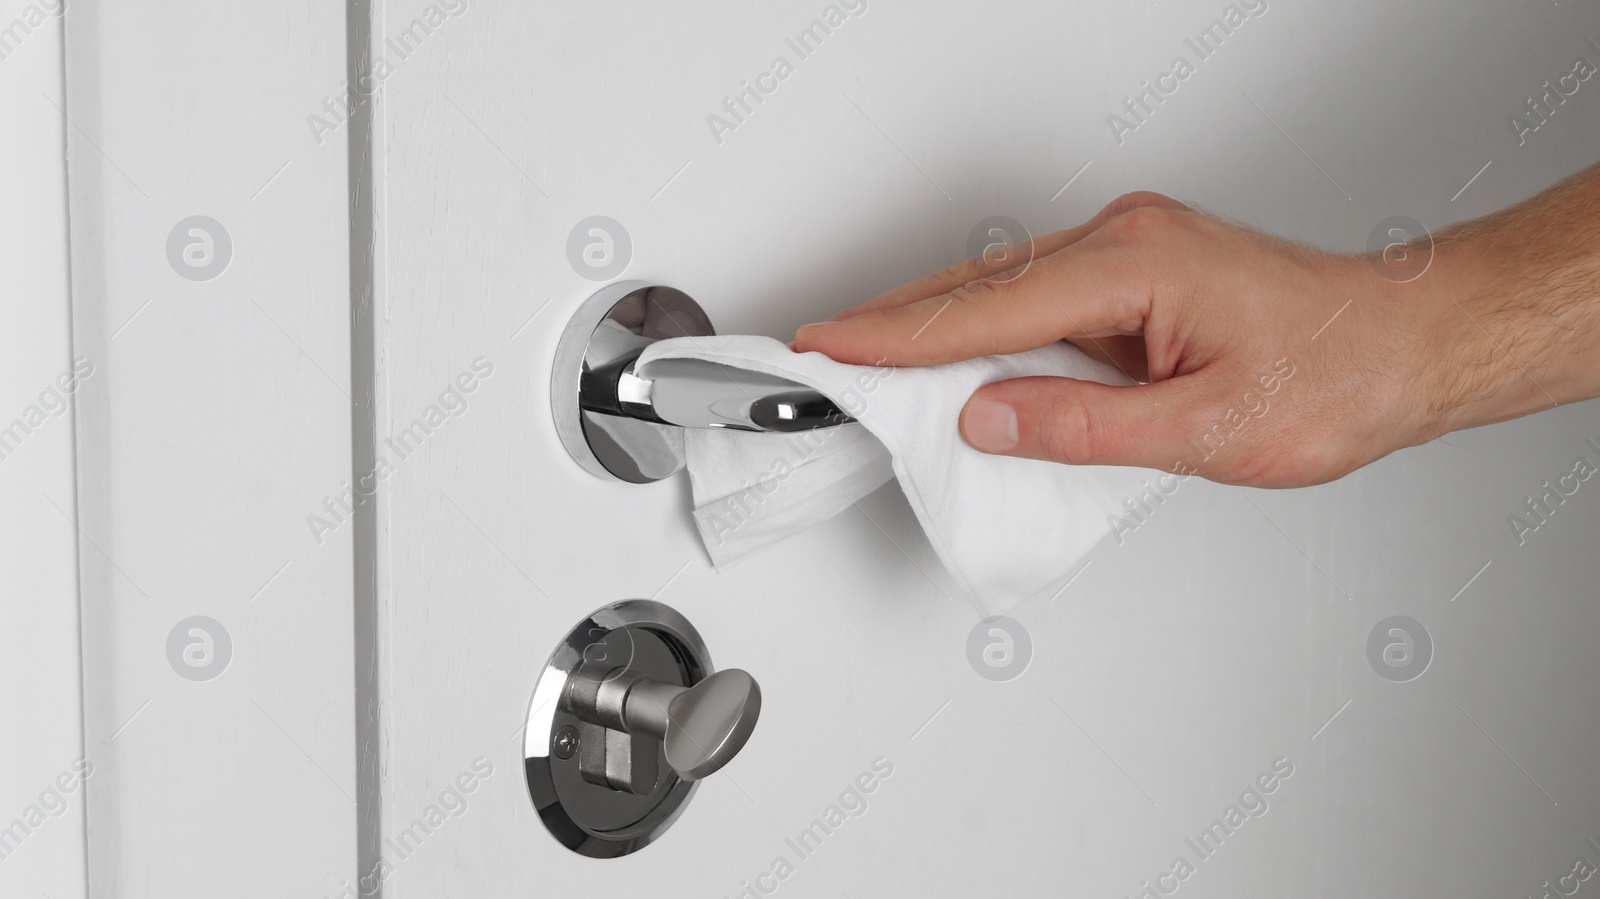 Photo of Man cleaning doorknob with disinfecting wipe indoors, closeup. Protective measures